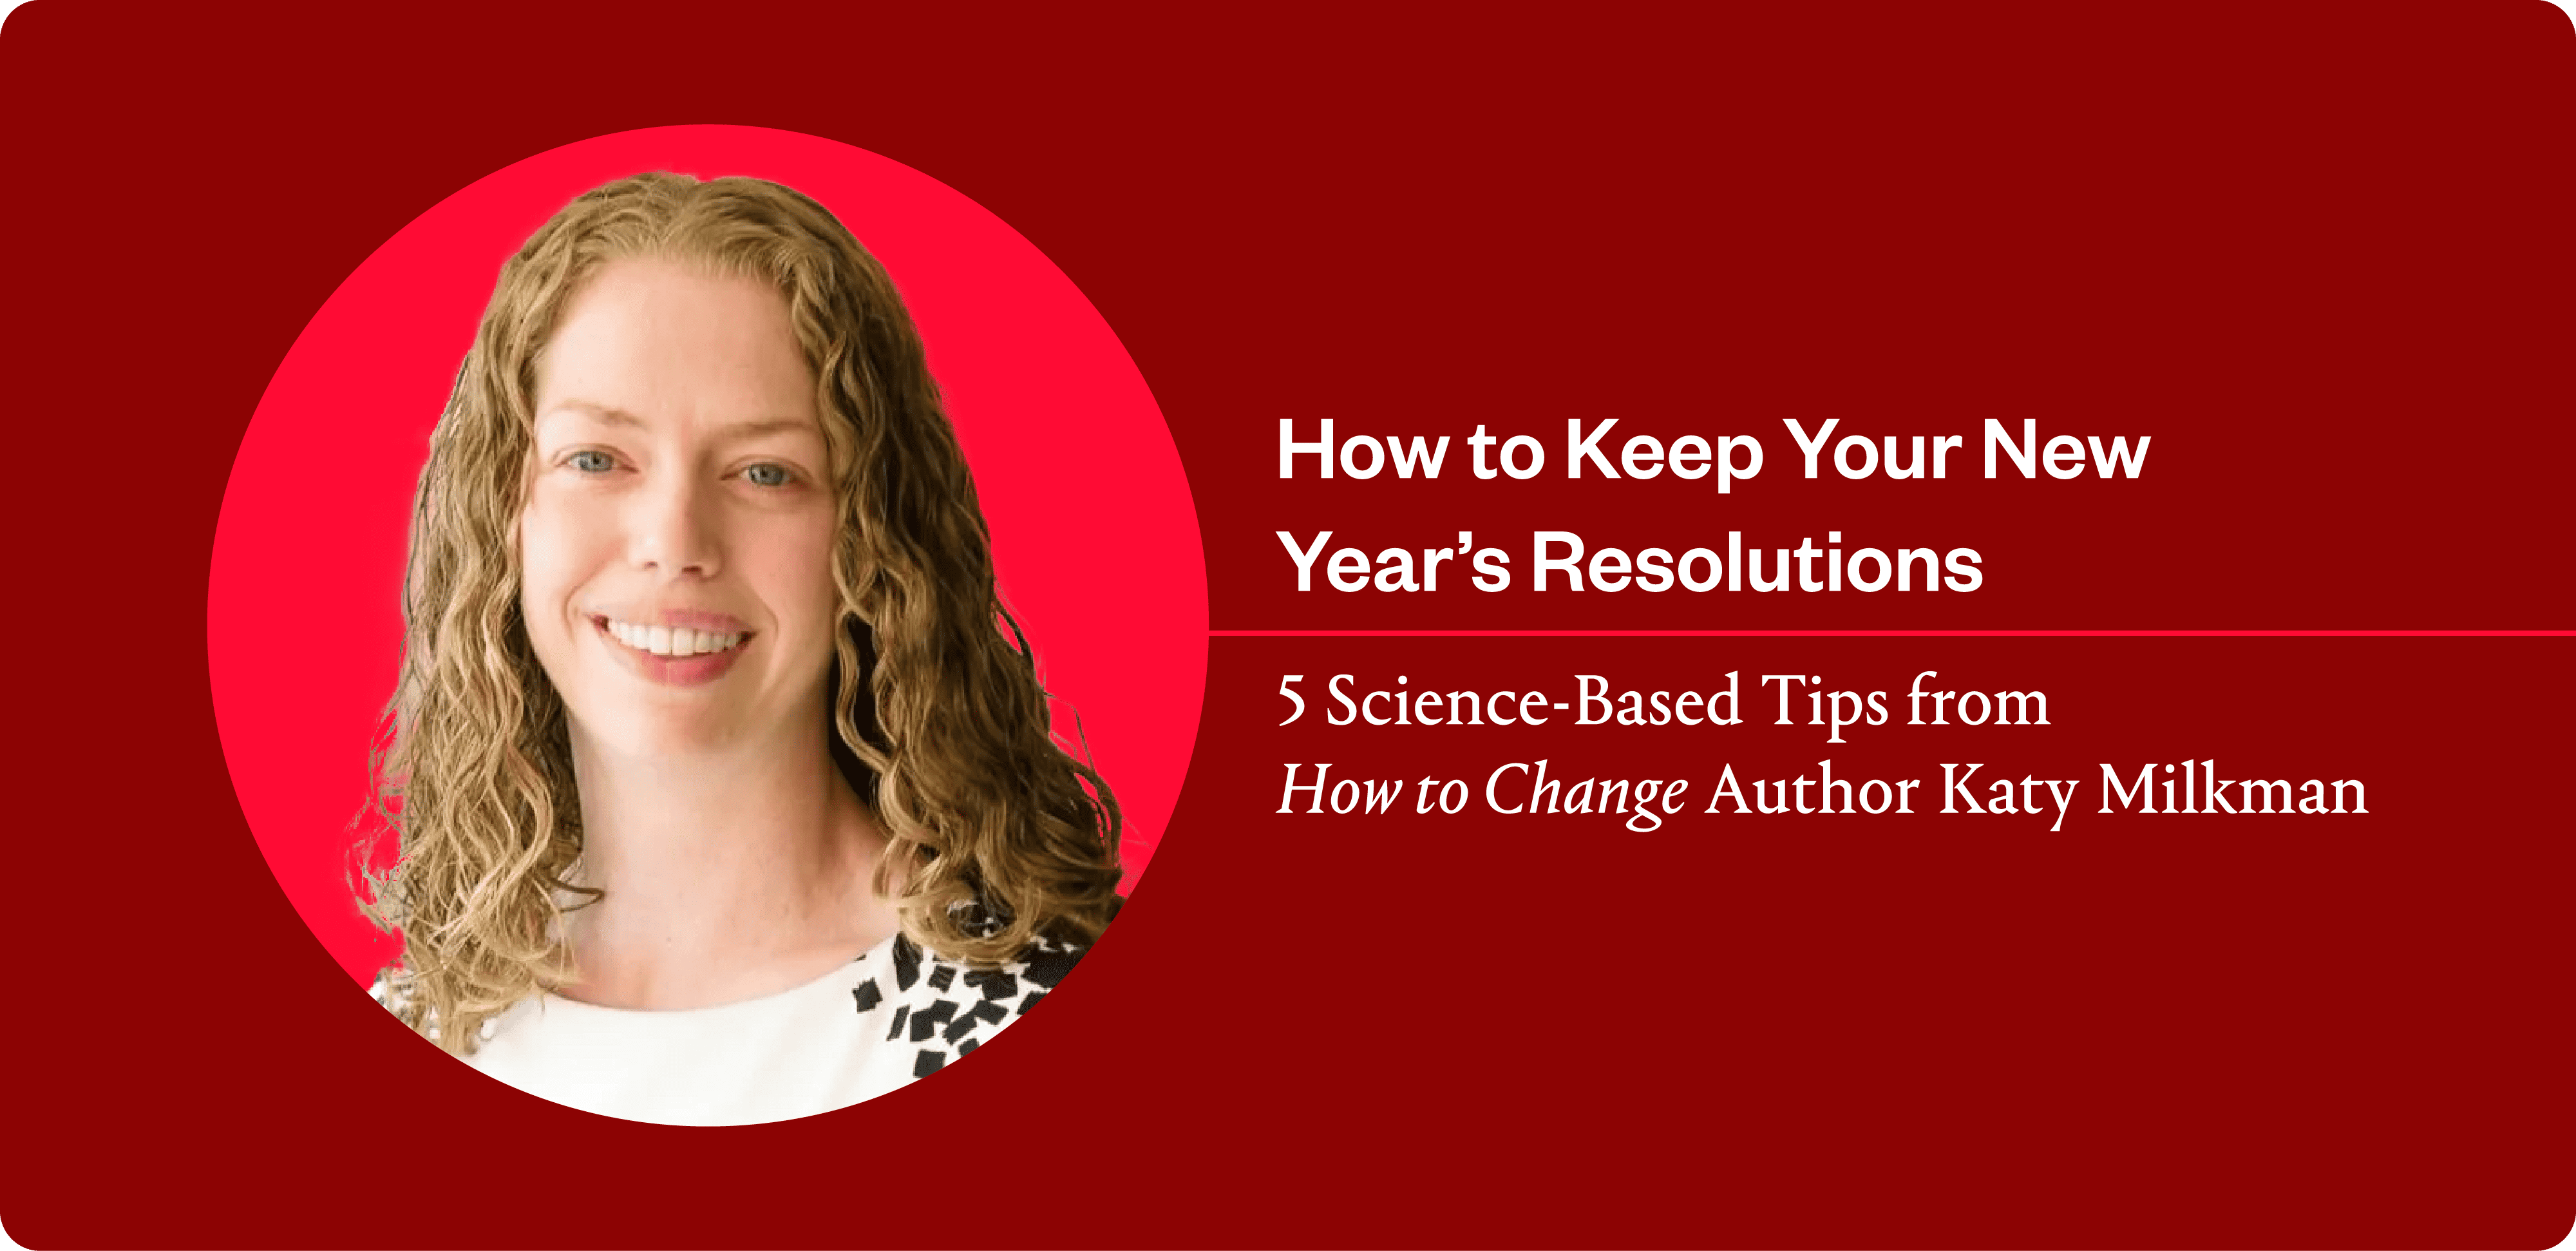 5 Tips for Keeping Your New Year’s Resolutions: Thinkers50 Member Katy Milkman, Author of How to Change